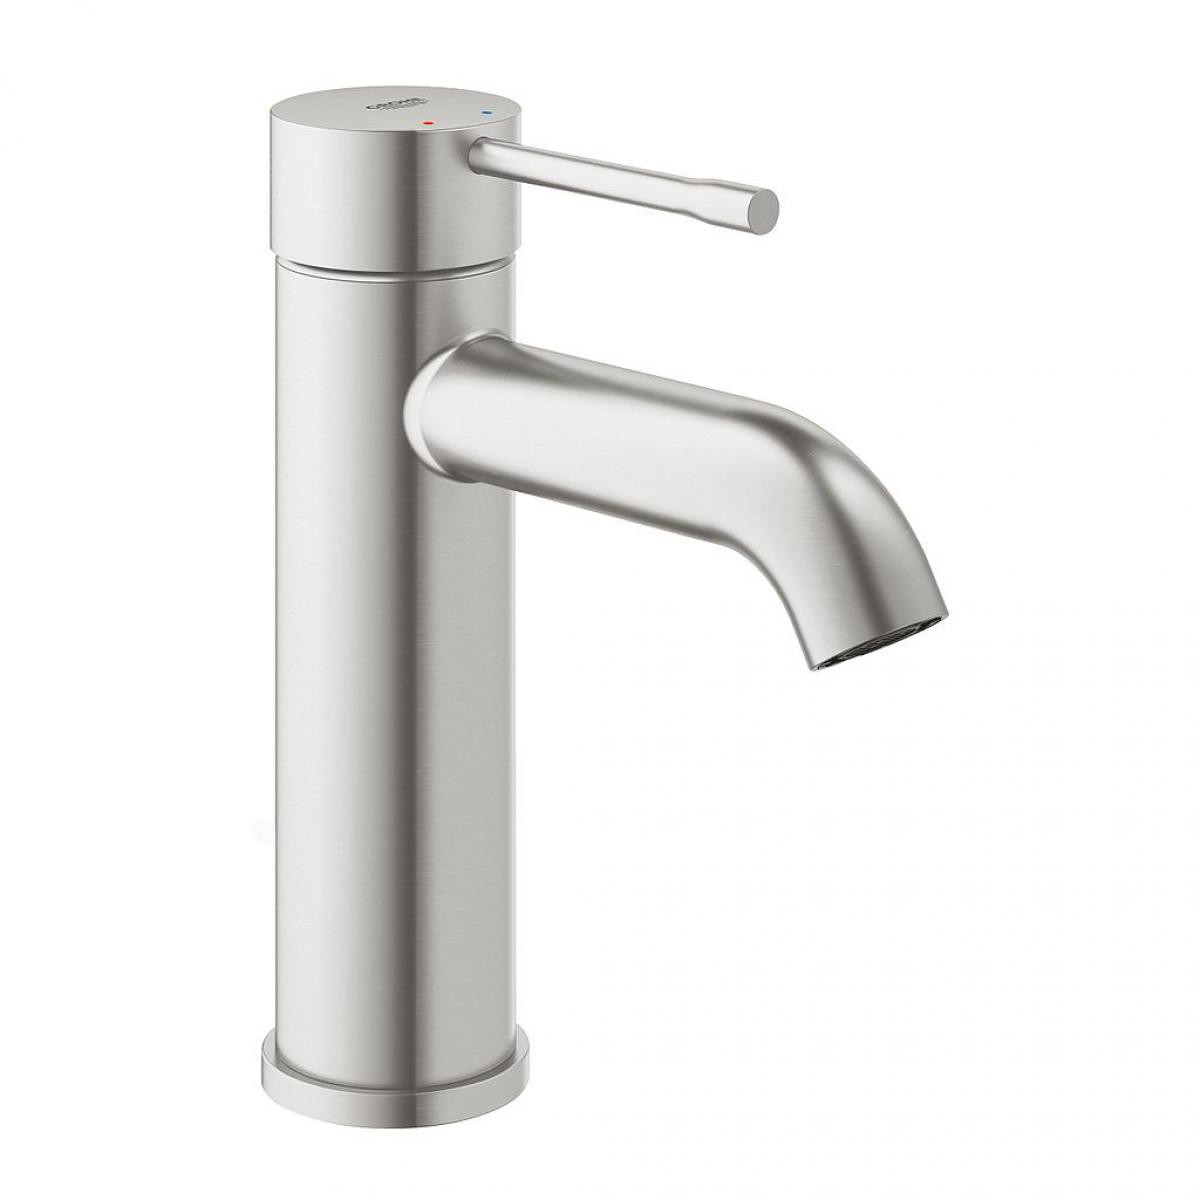 Grohe - Grohe - Mitigeur Essence monocommande lavabo taille S Supersteel - 23590DC1 - Mitigeur douche